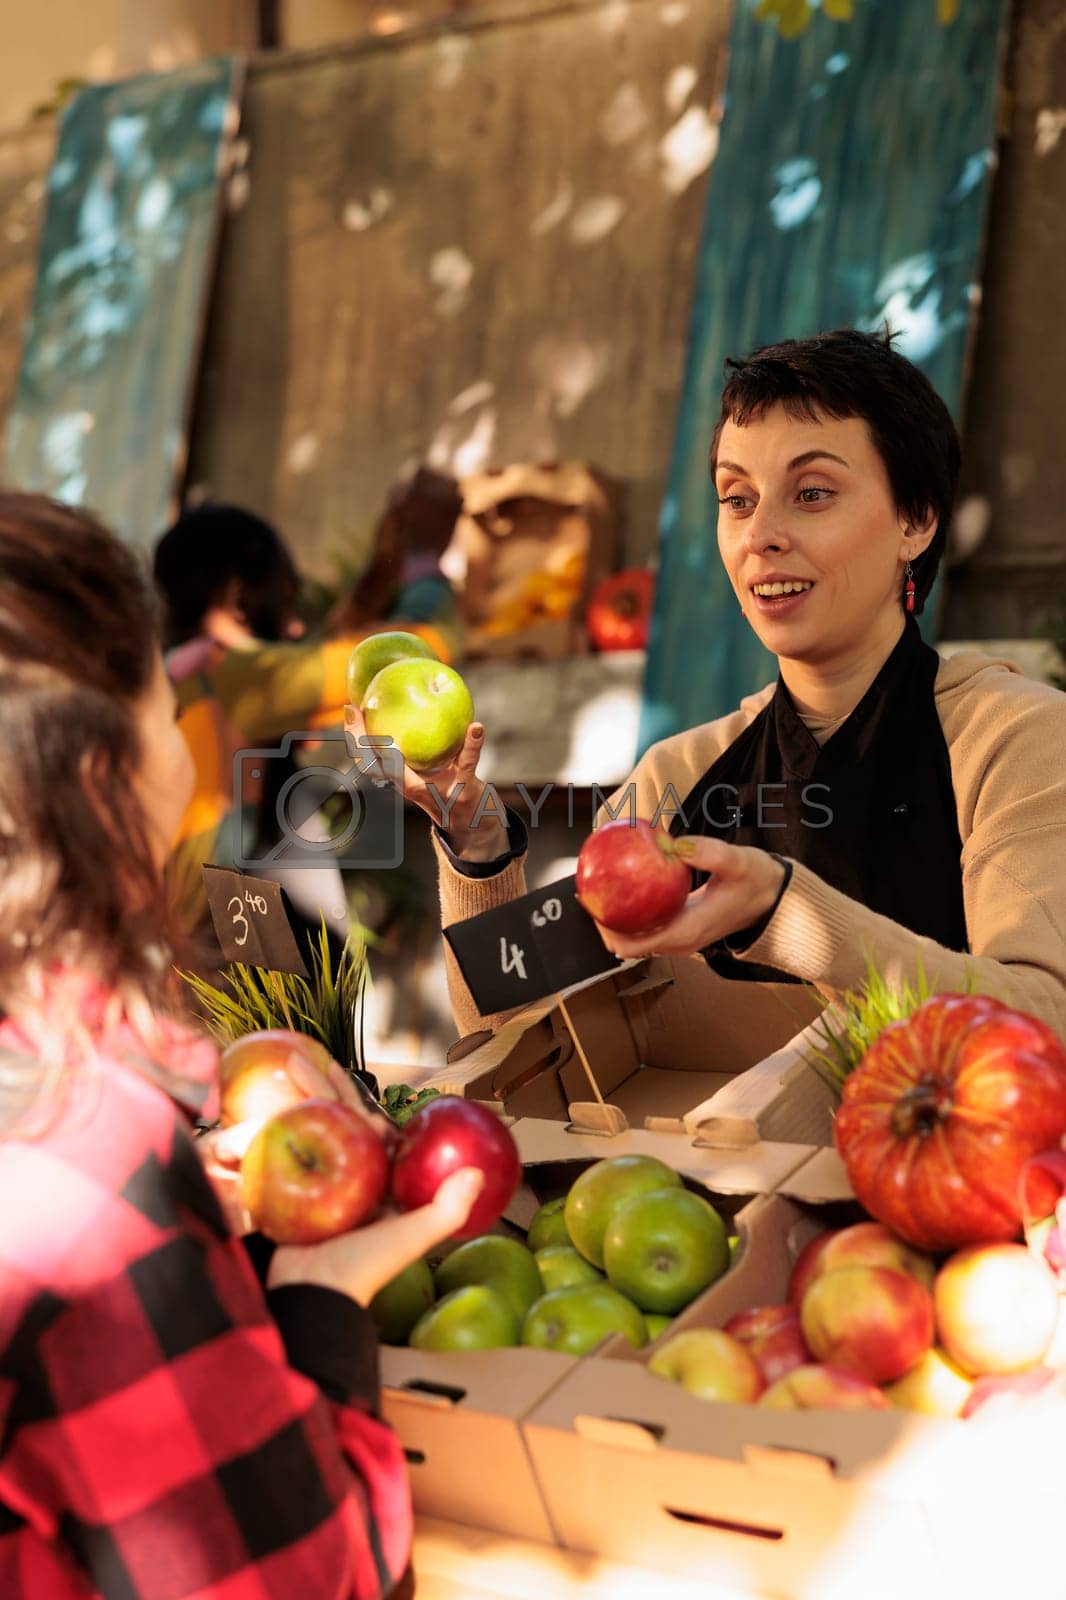 Royalty free image of Farmers market vendor talking with customer by DCStudio